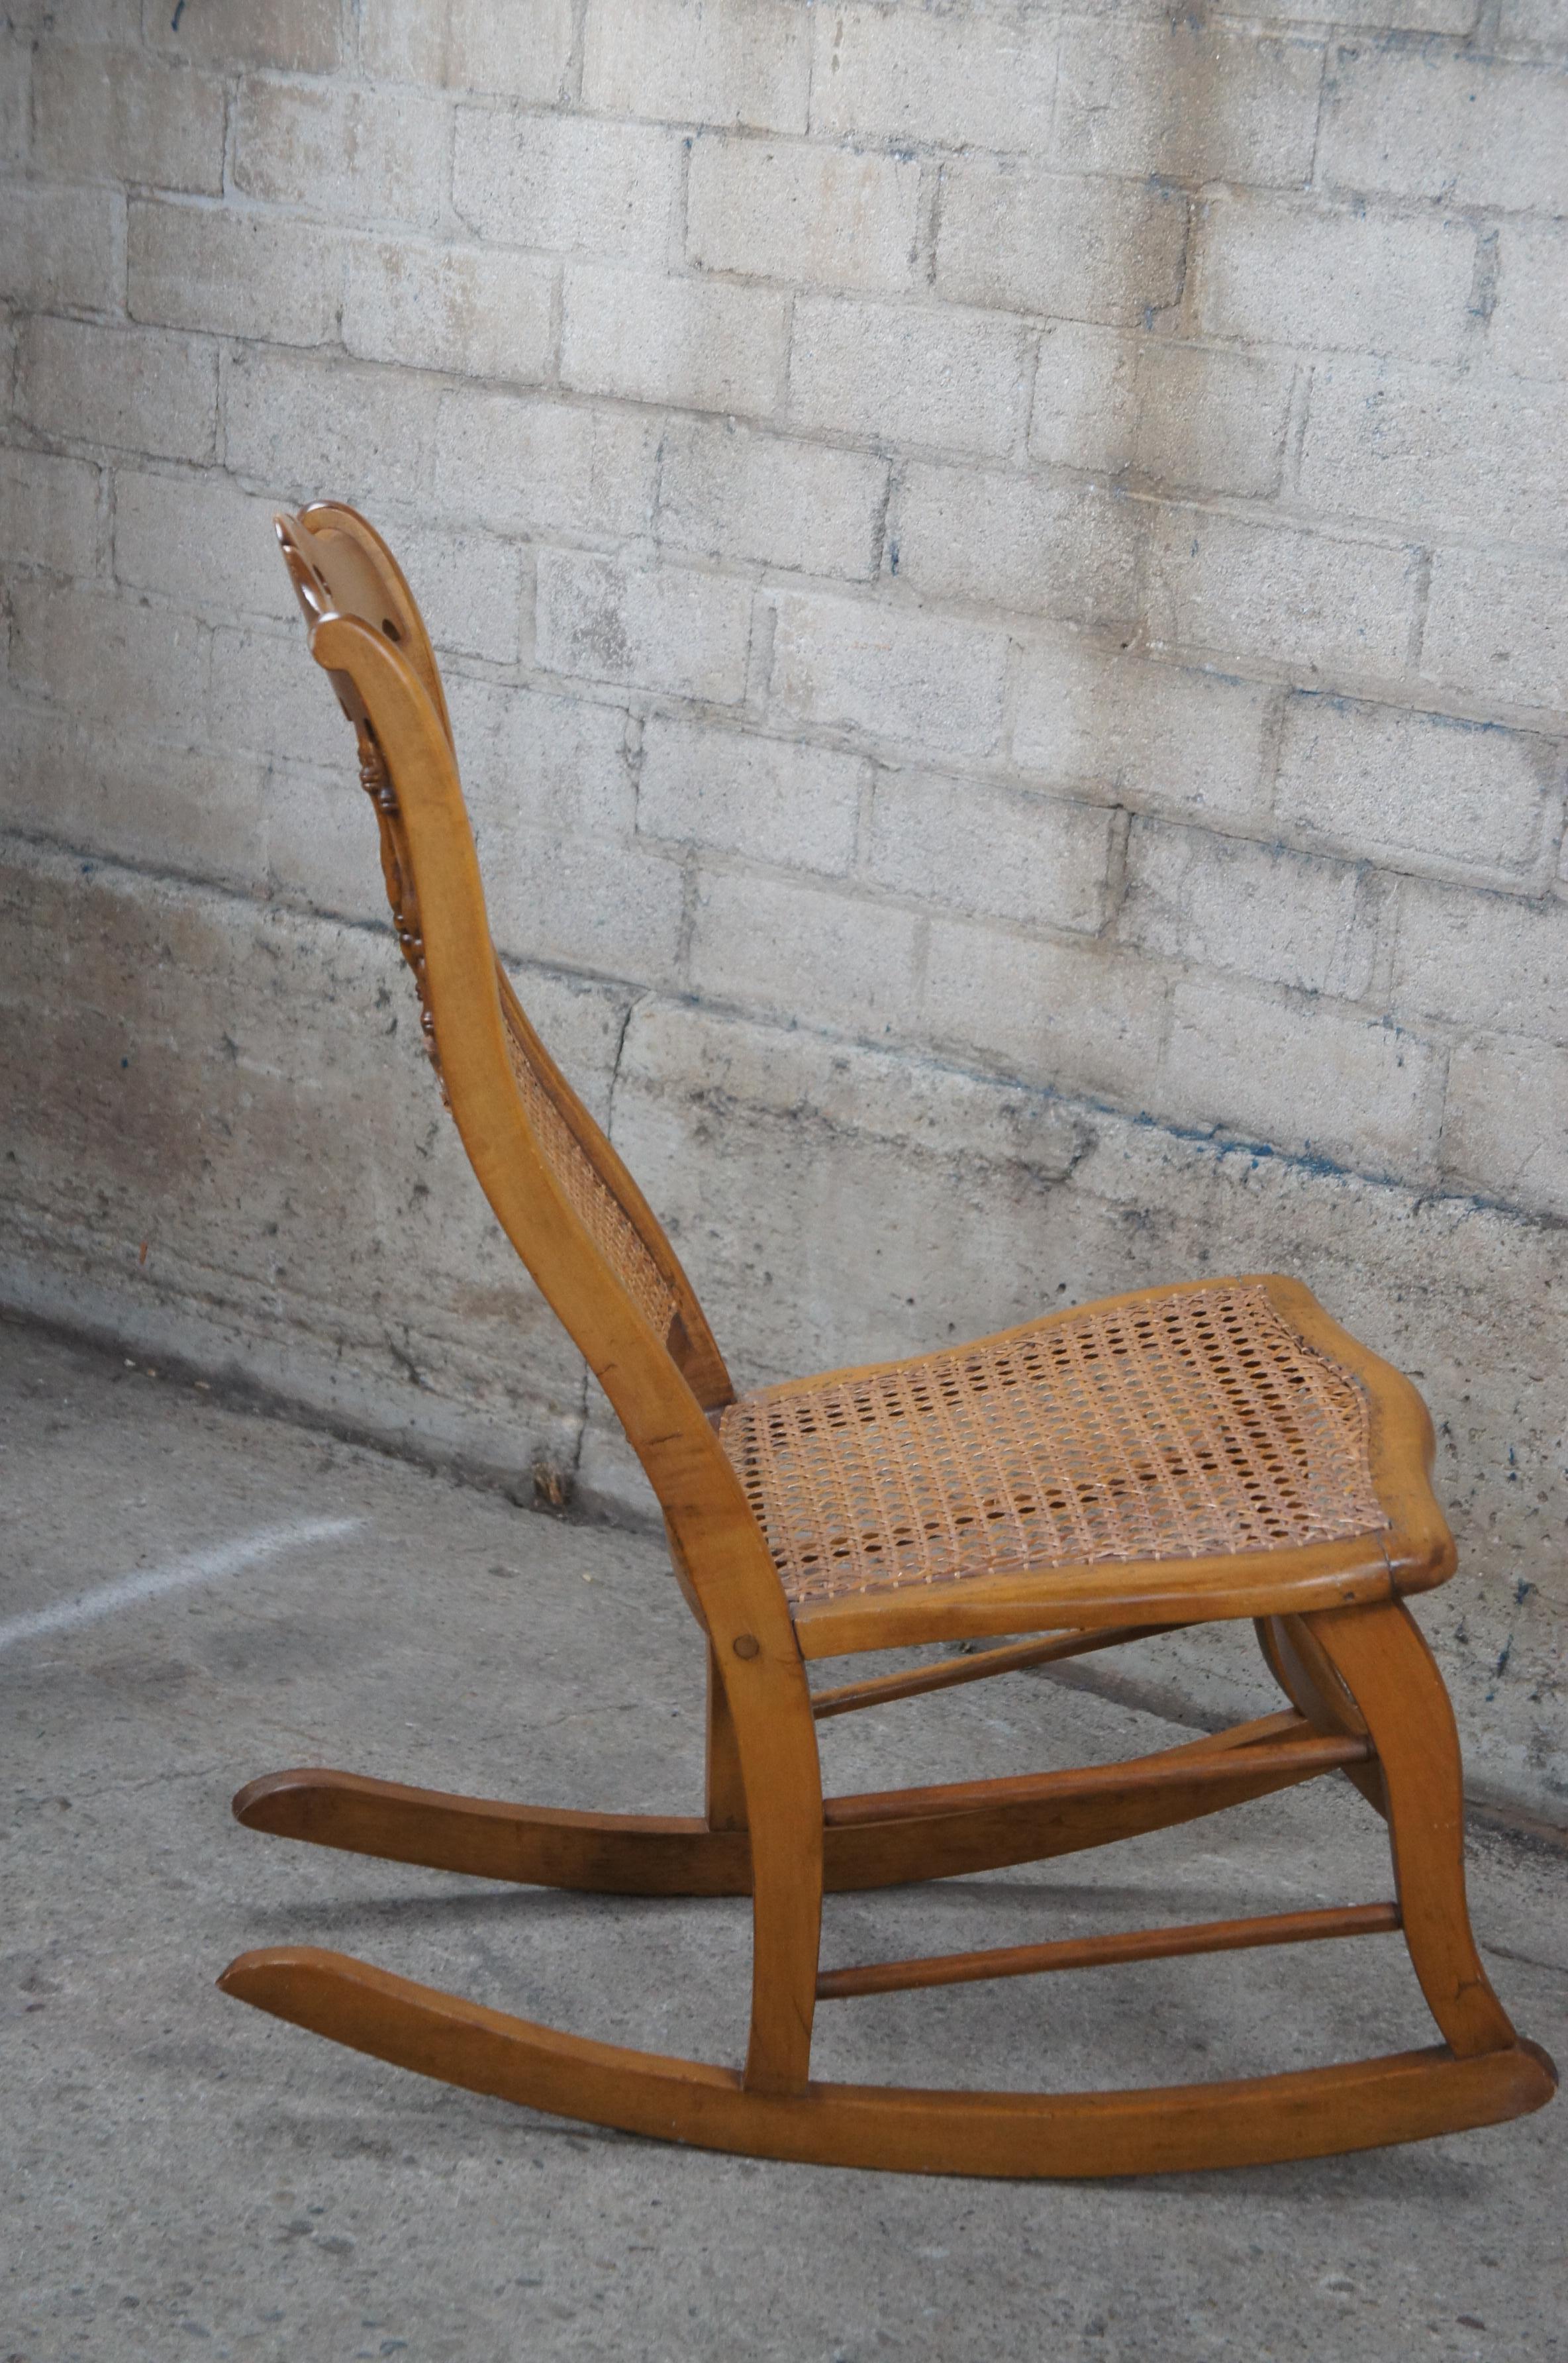 20th Century Antique Early American Maple Spindle Back Rocking Chair Cane Seat Petite Rocker For Sale